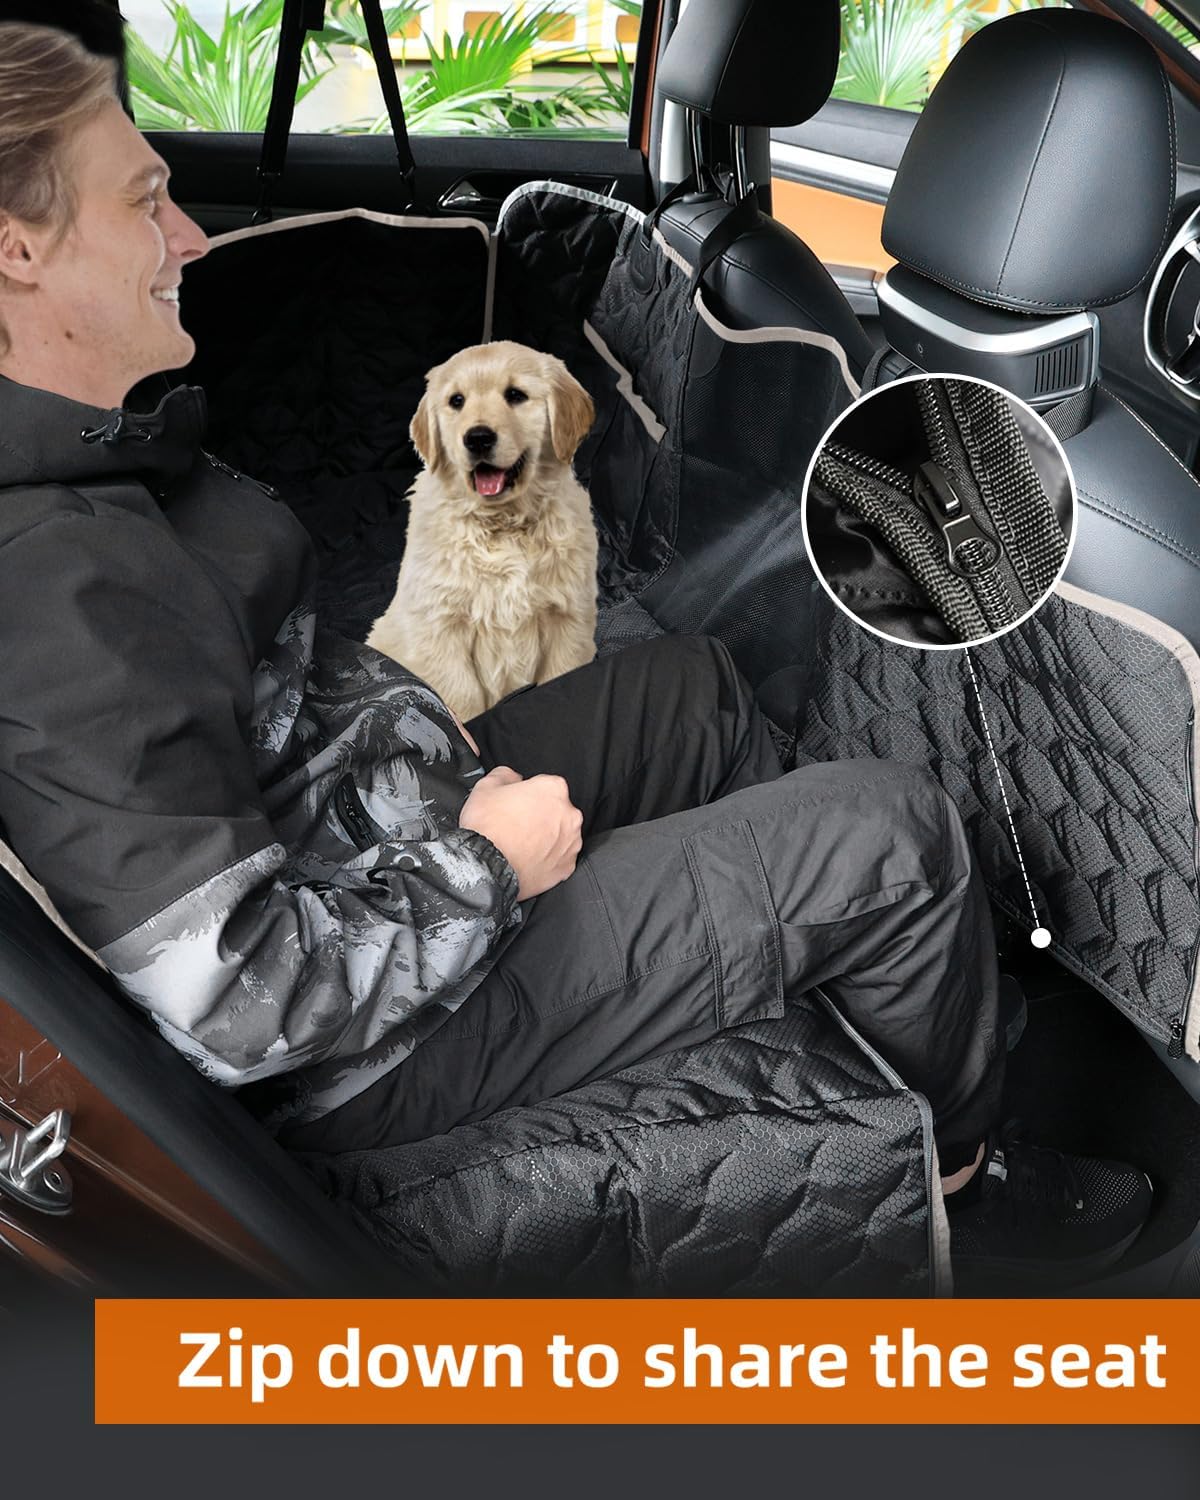 PETICON Dog Car Seat Cover for Back Seat, Waterproof Dog Seat Cover for Cars with Mesh Window, Scratchproof Back Seat Cover for Dogs, Nonslip Dog Hammock for Cars, Trucks, SUVs, Black and Beige